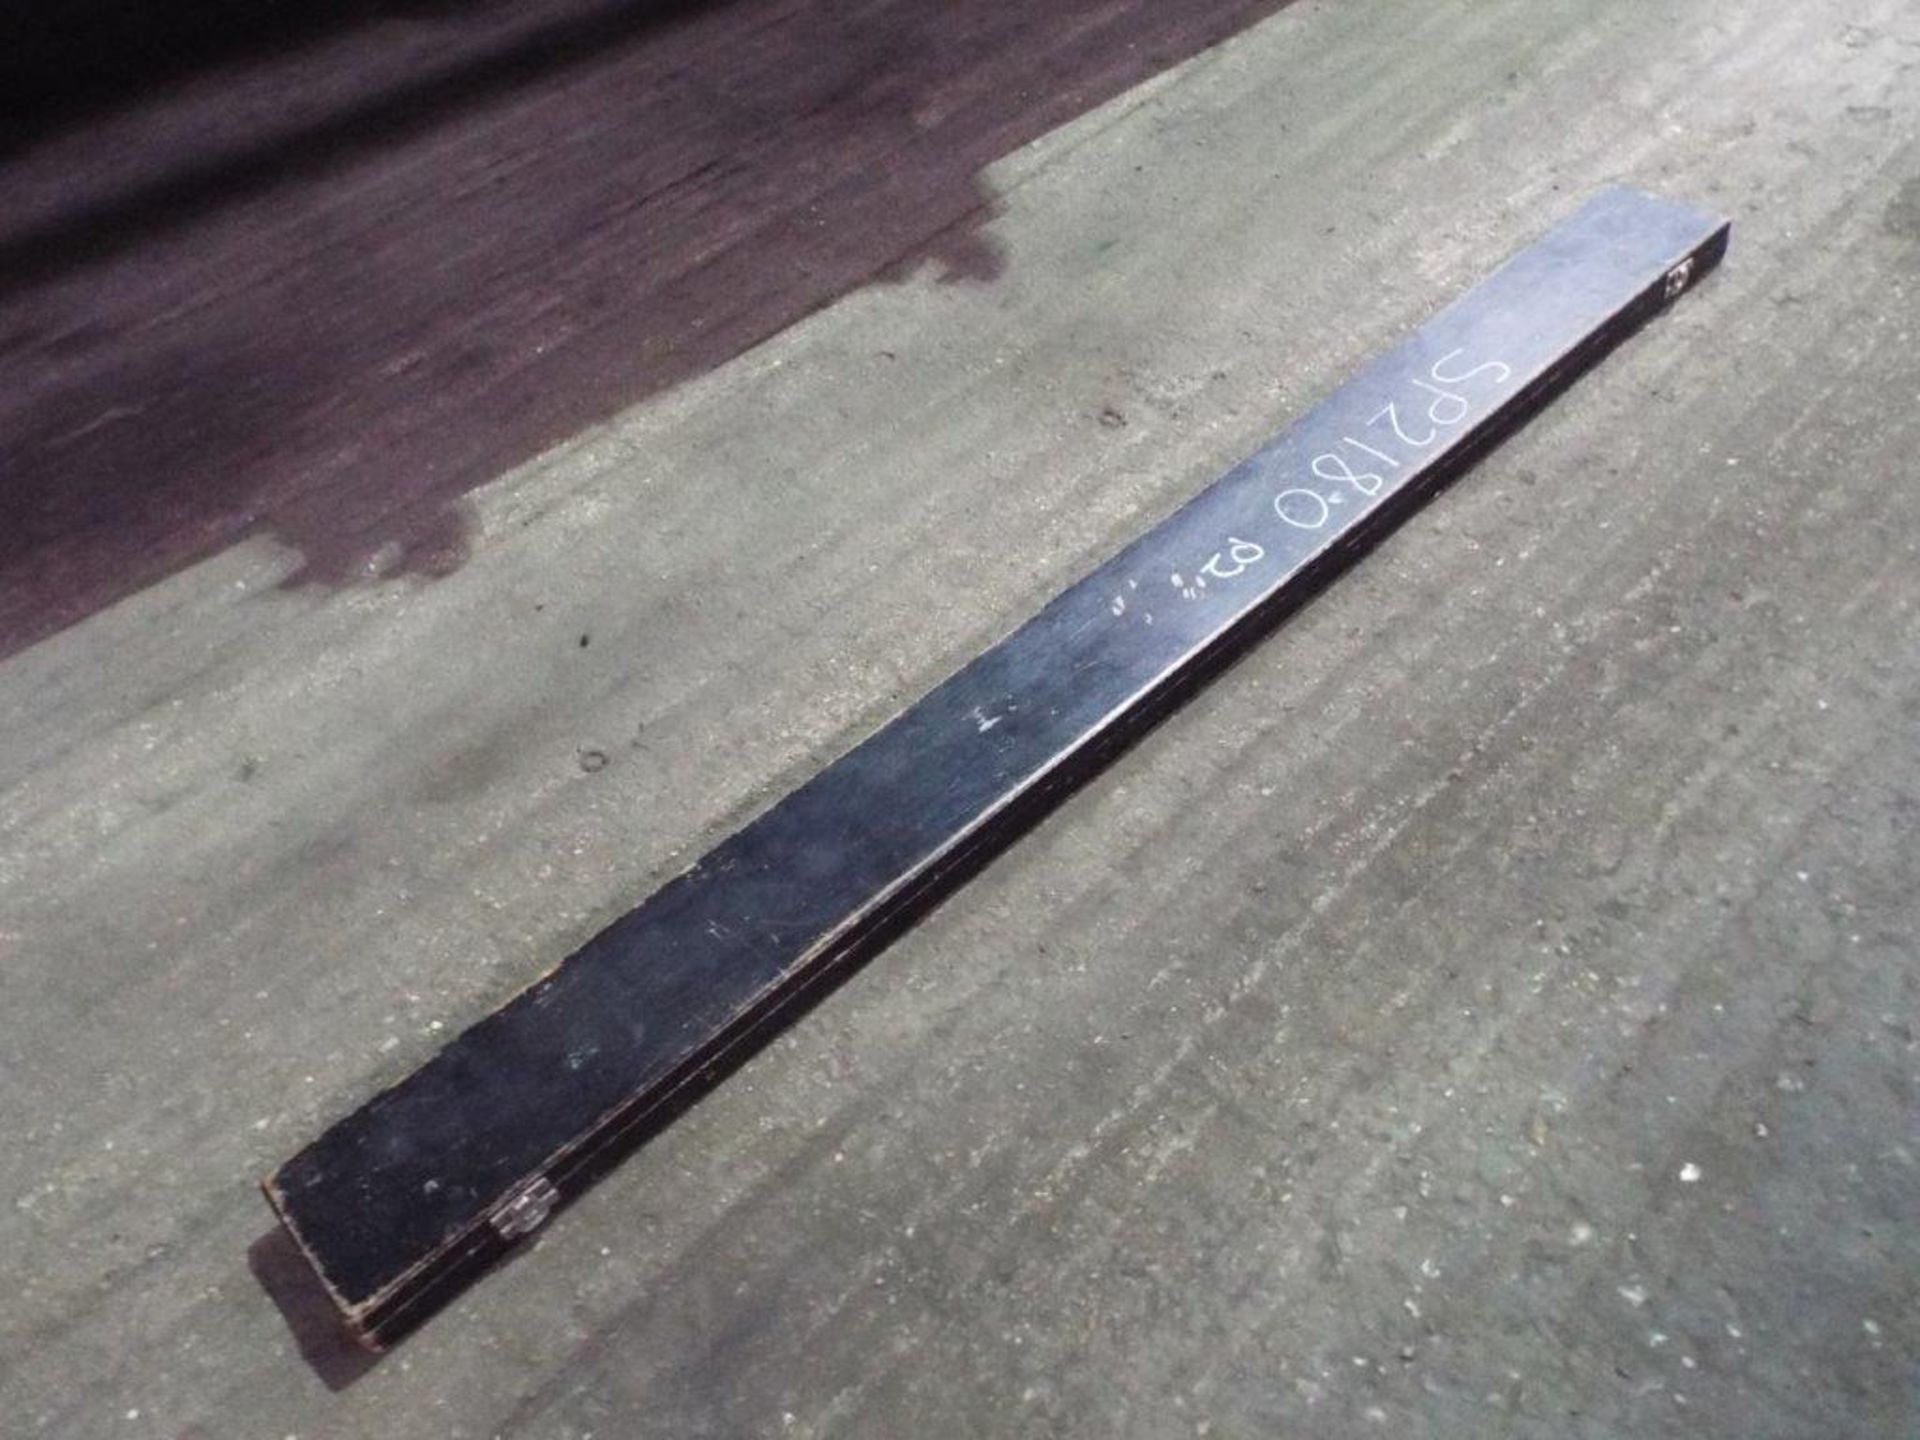 Heavy Duty Stainless Steel 1m Straight Edge in Wooden Transit Case - Image 4 of 6